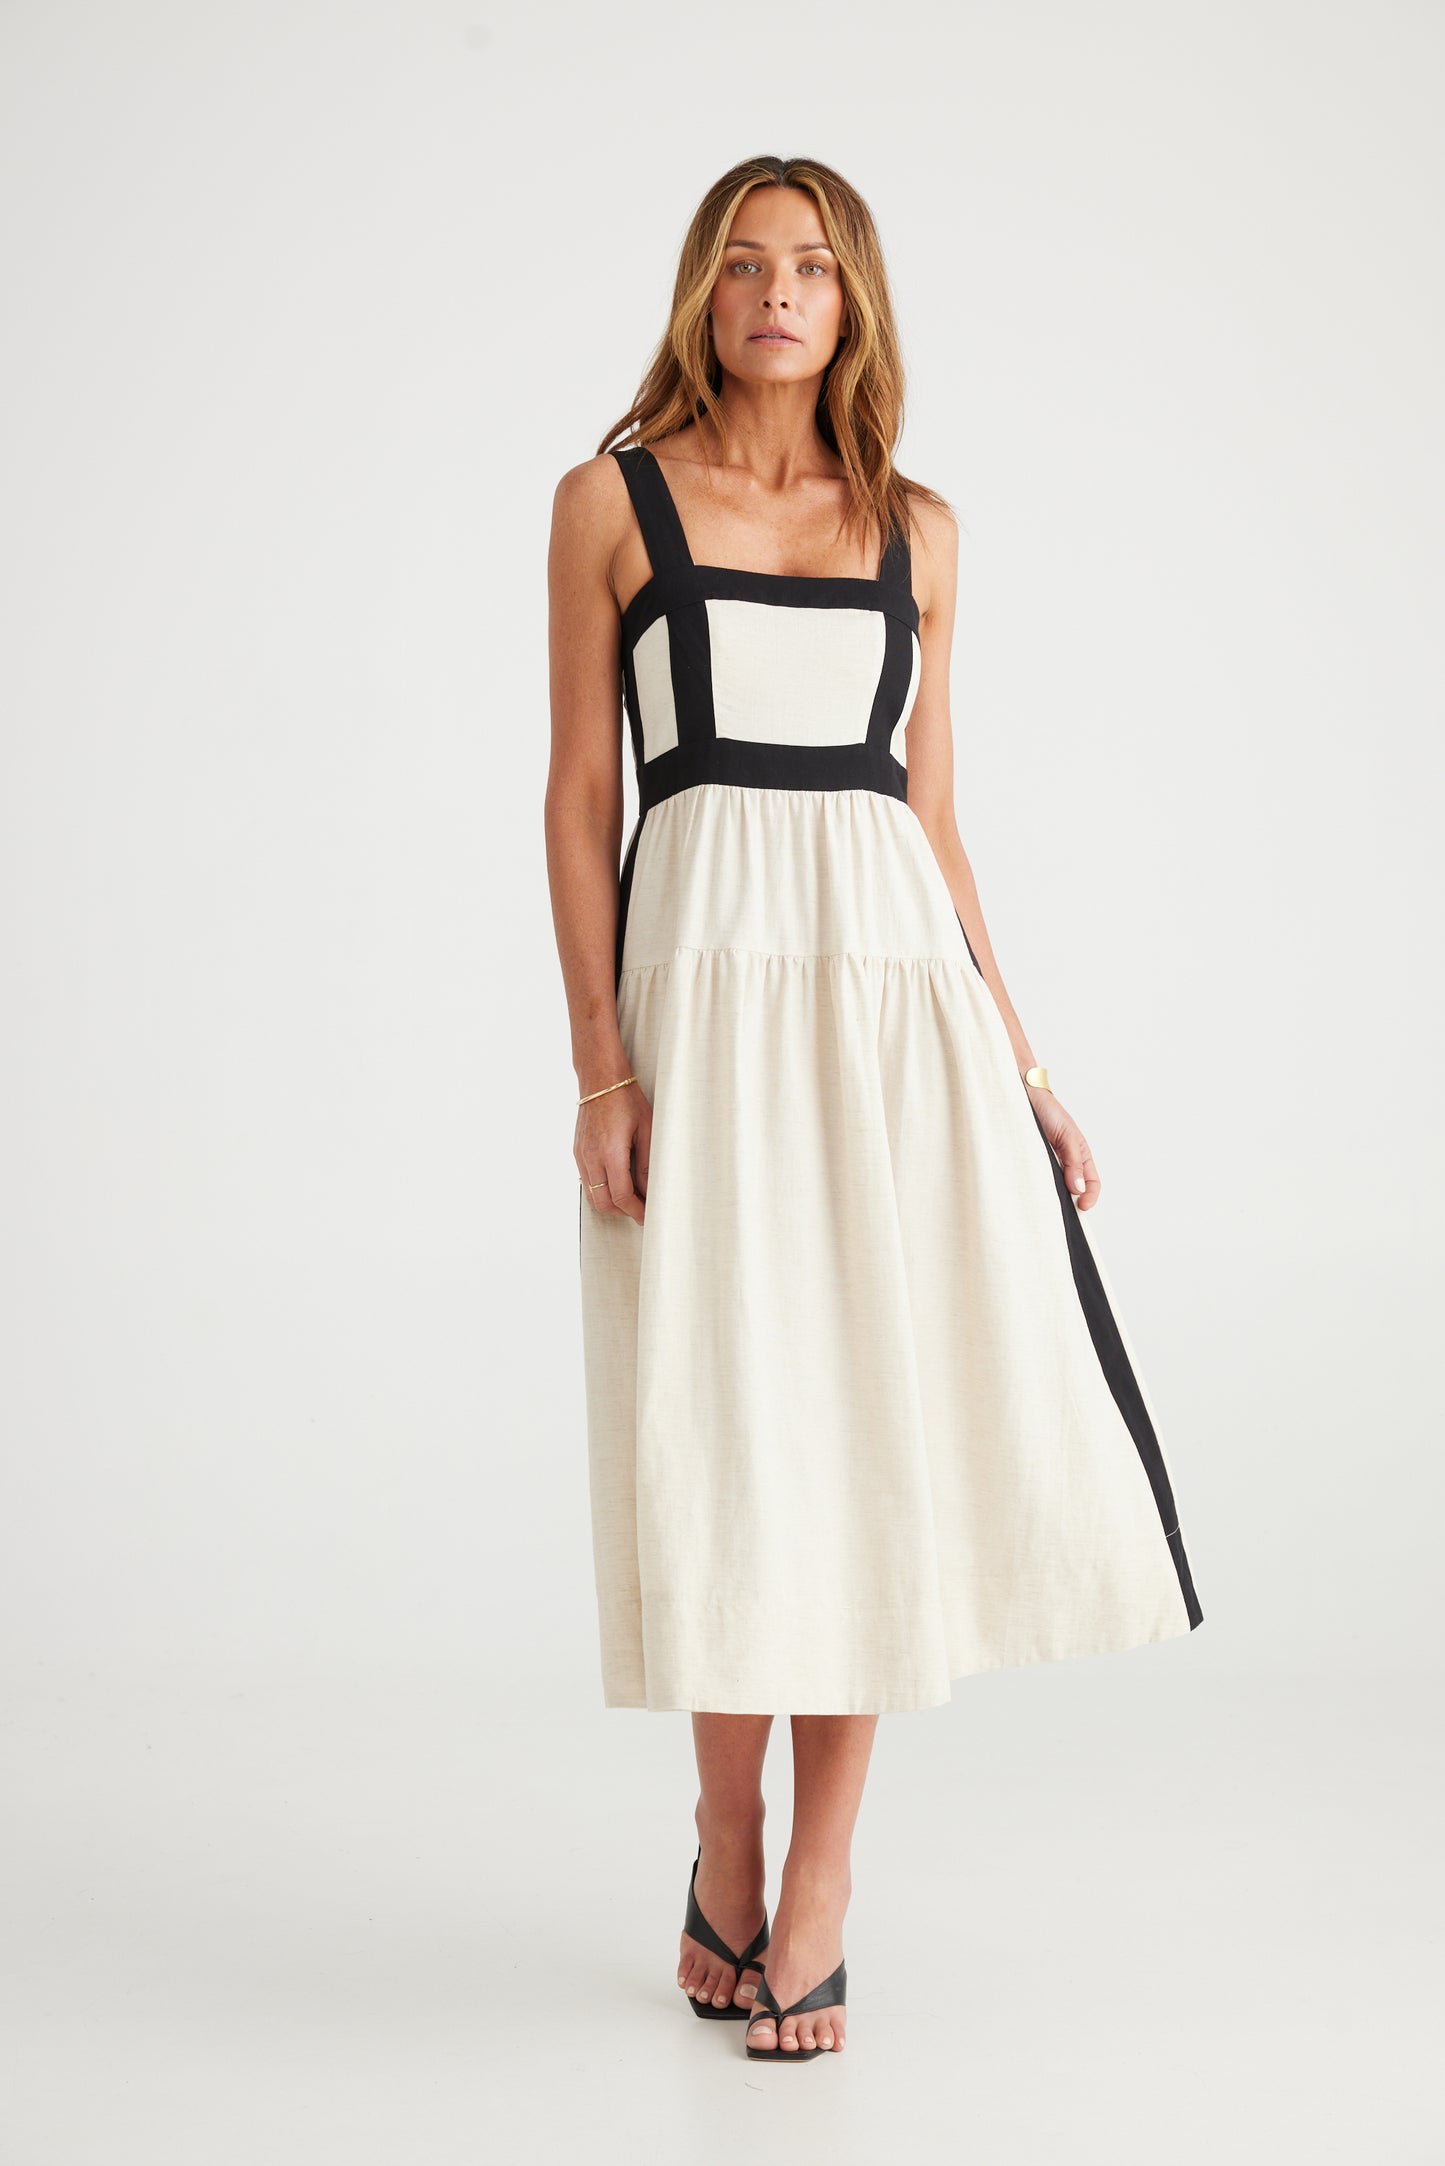 
                  
                    Jolie Dress | Natural + Black Featured contrast panels Full skirt gathered into waistband Side seam pockets Centre back zip openeing Midi length 50% Cotton, 30% Linen, 20% Lyocell
                  
                